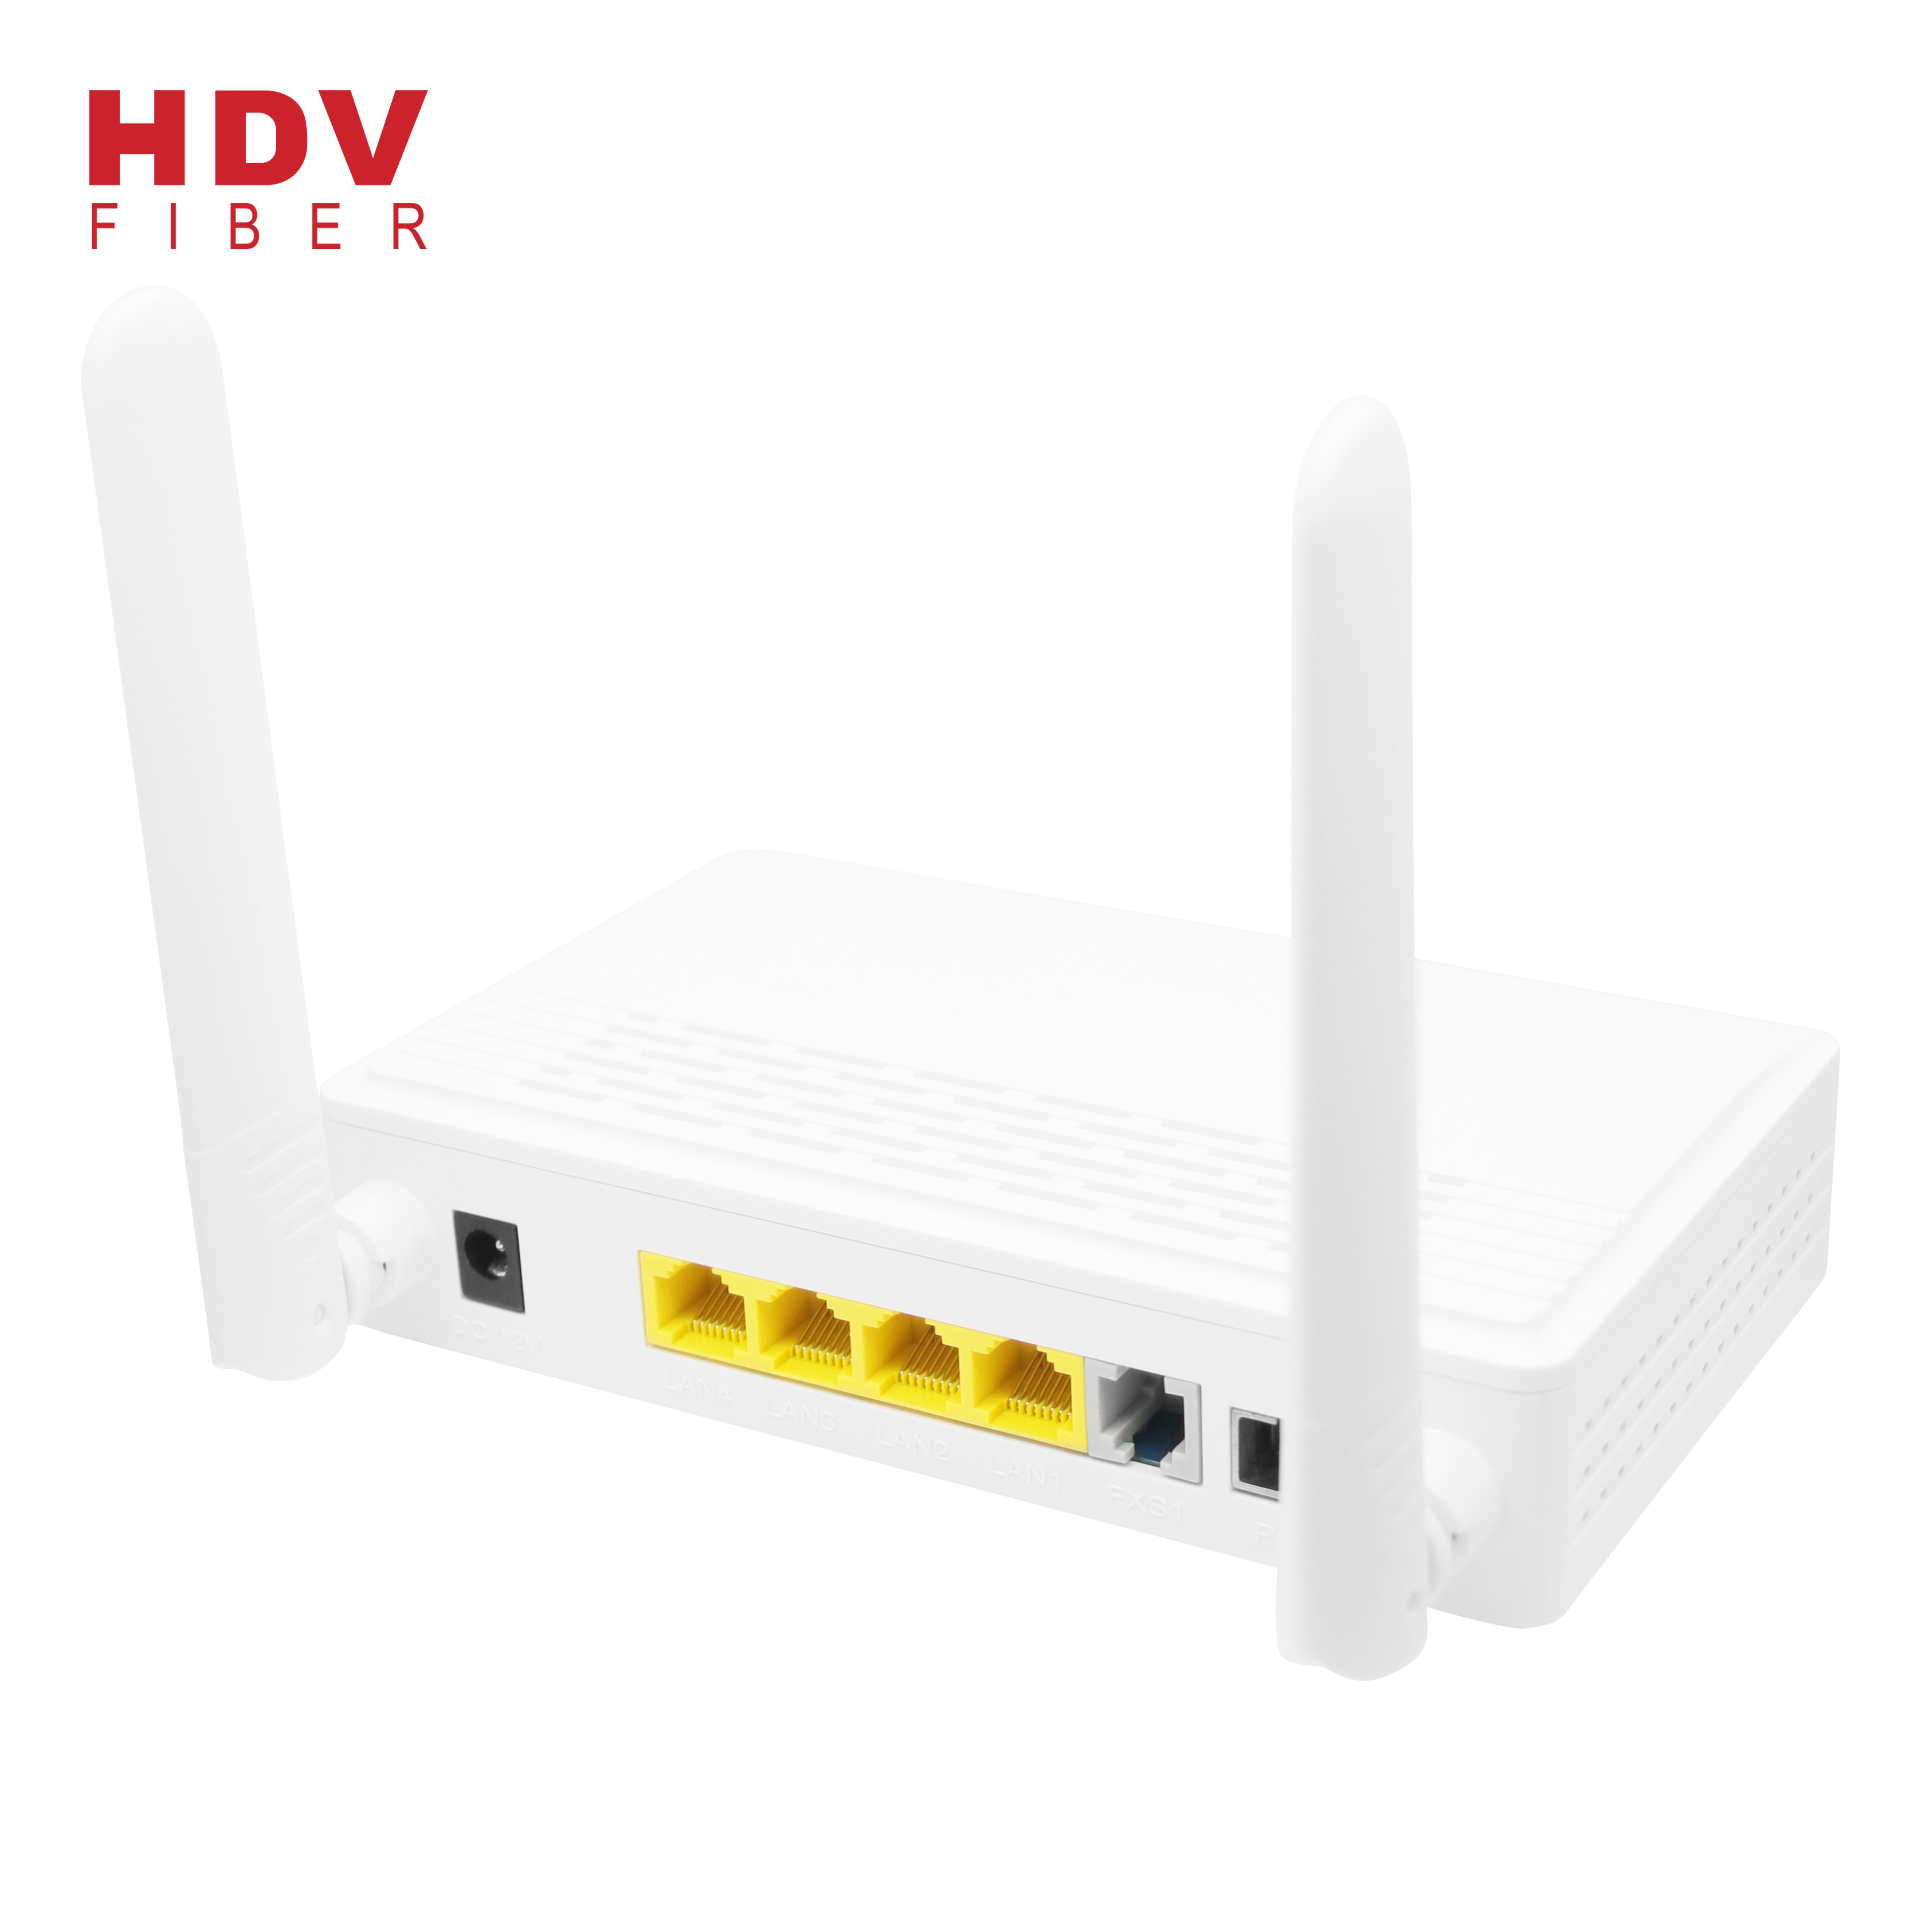 factory Outlets for Sfp-10g - XPON Both Gpon and Epon ONU 1GE 3FE phone for Family Gateway WIFI with 2 Antennas – HDV